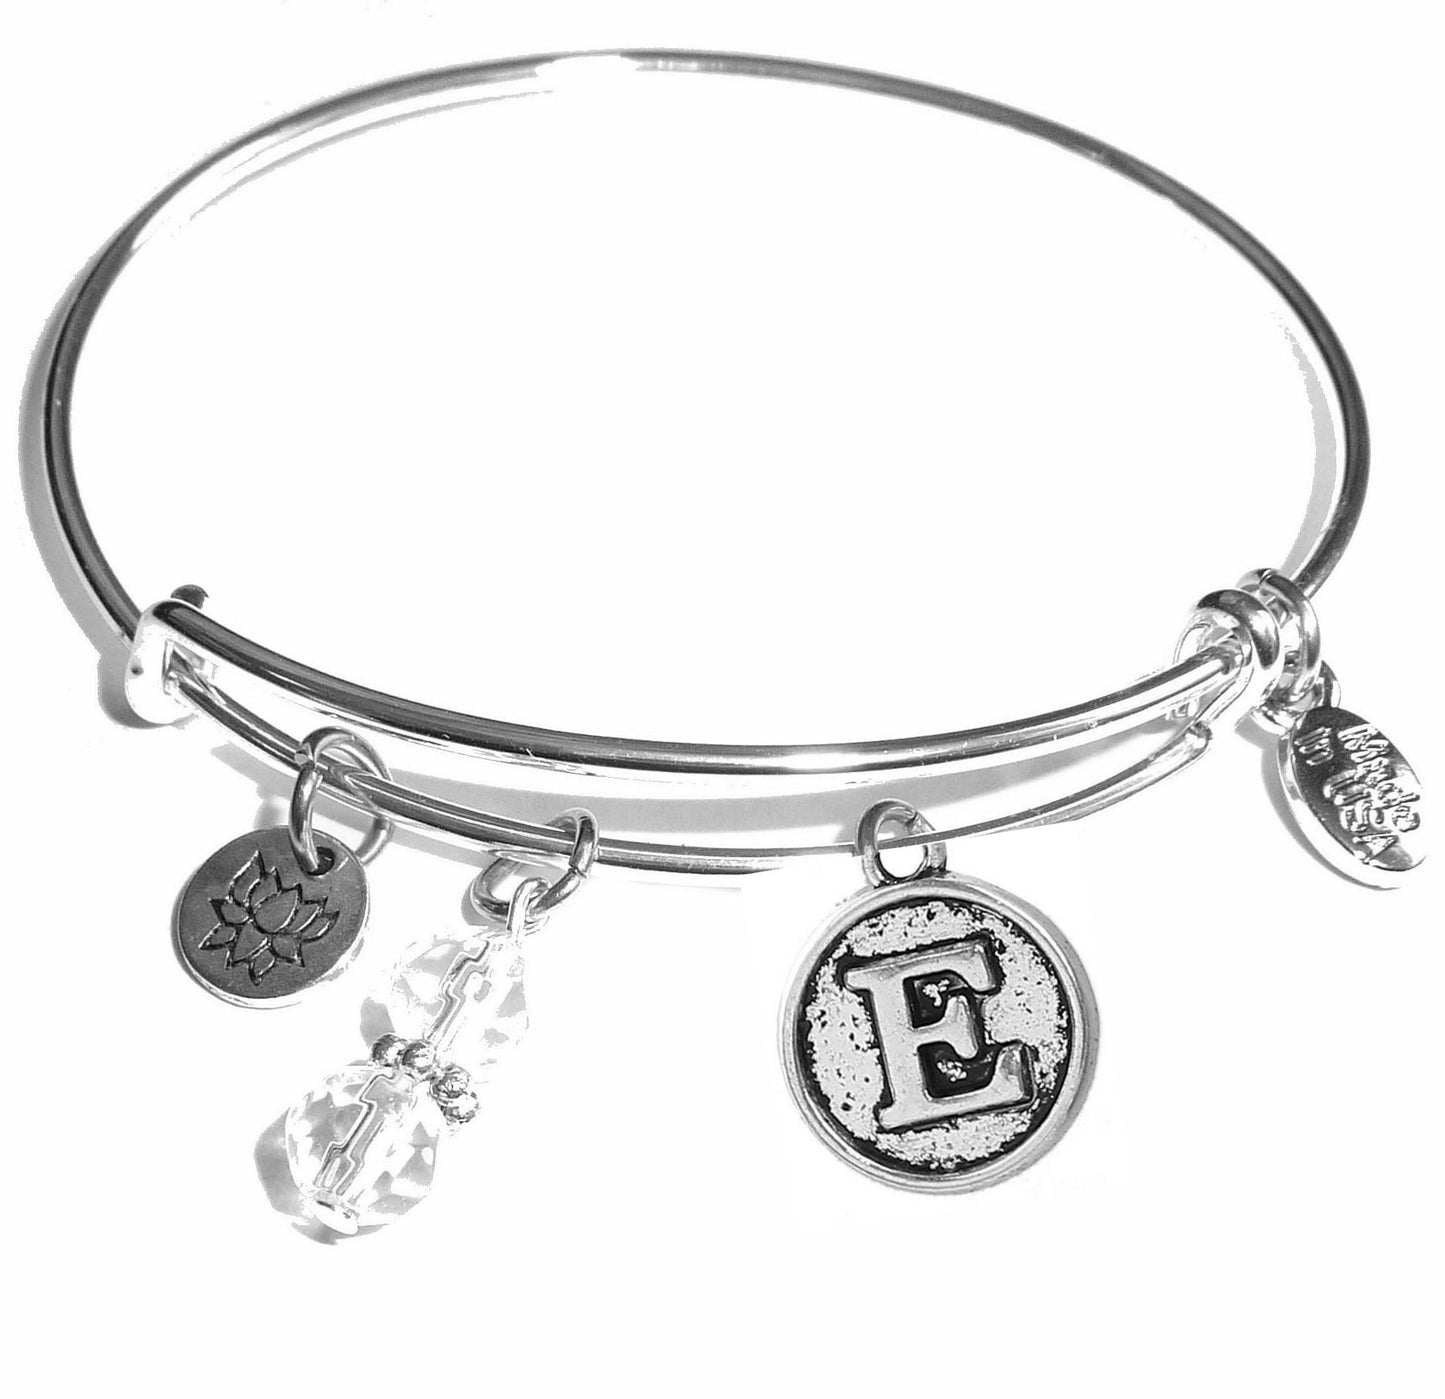 E - Initial Bangle Bracelet -Expandable Wire Bracelet– Comes in a gift box